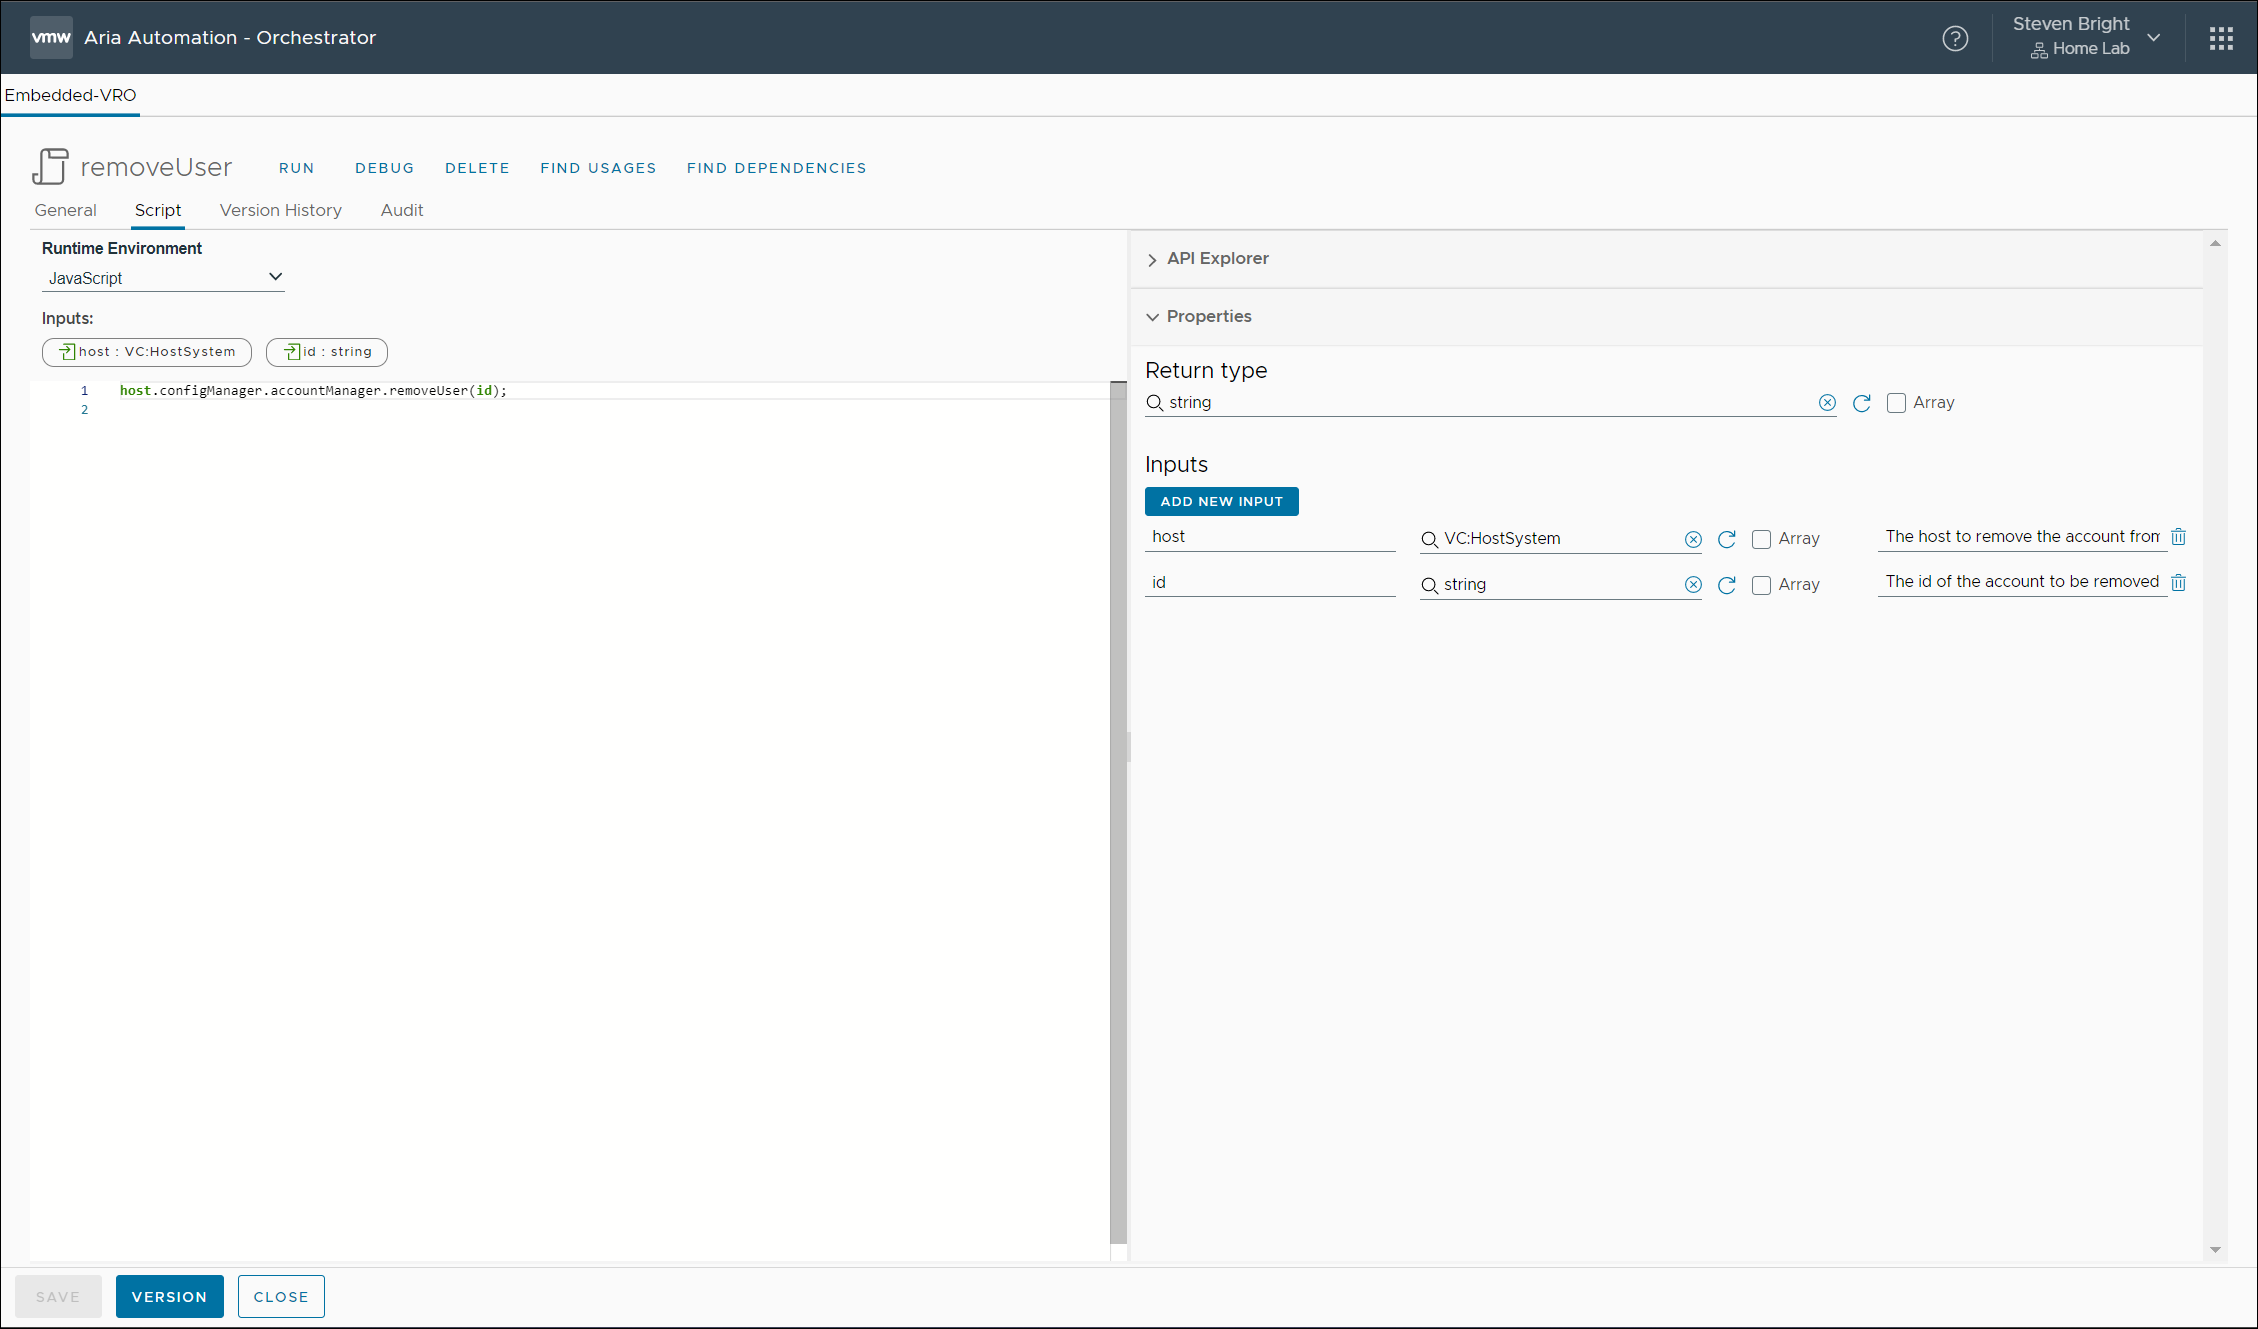 Screenshot of the removeUser action in VMware Aria Automation Orchestrator